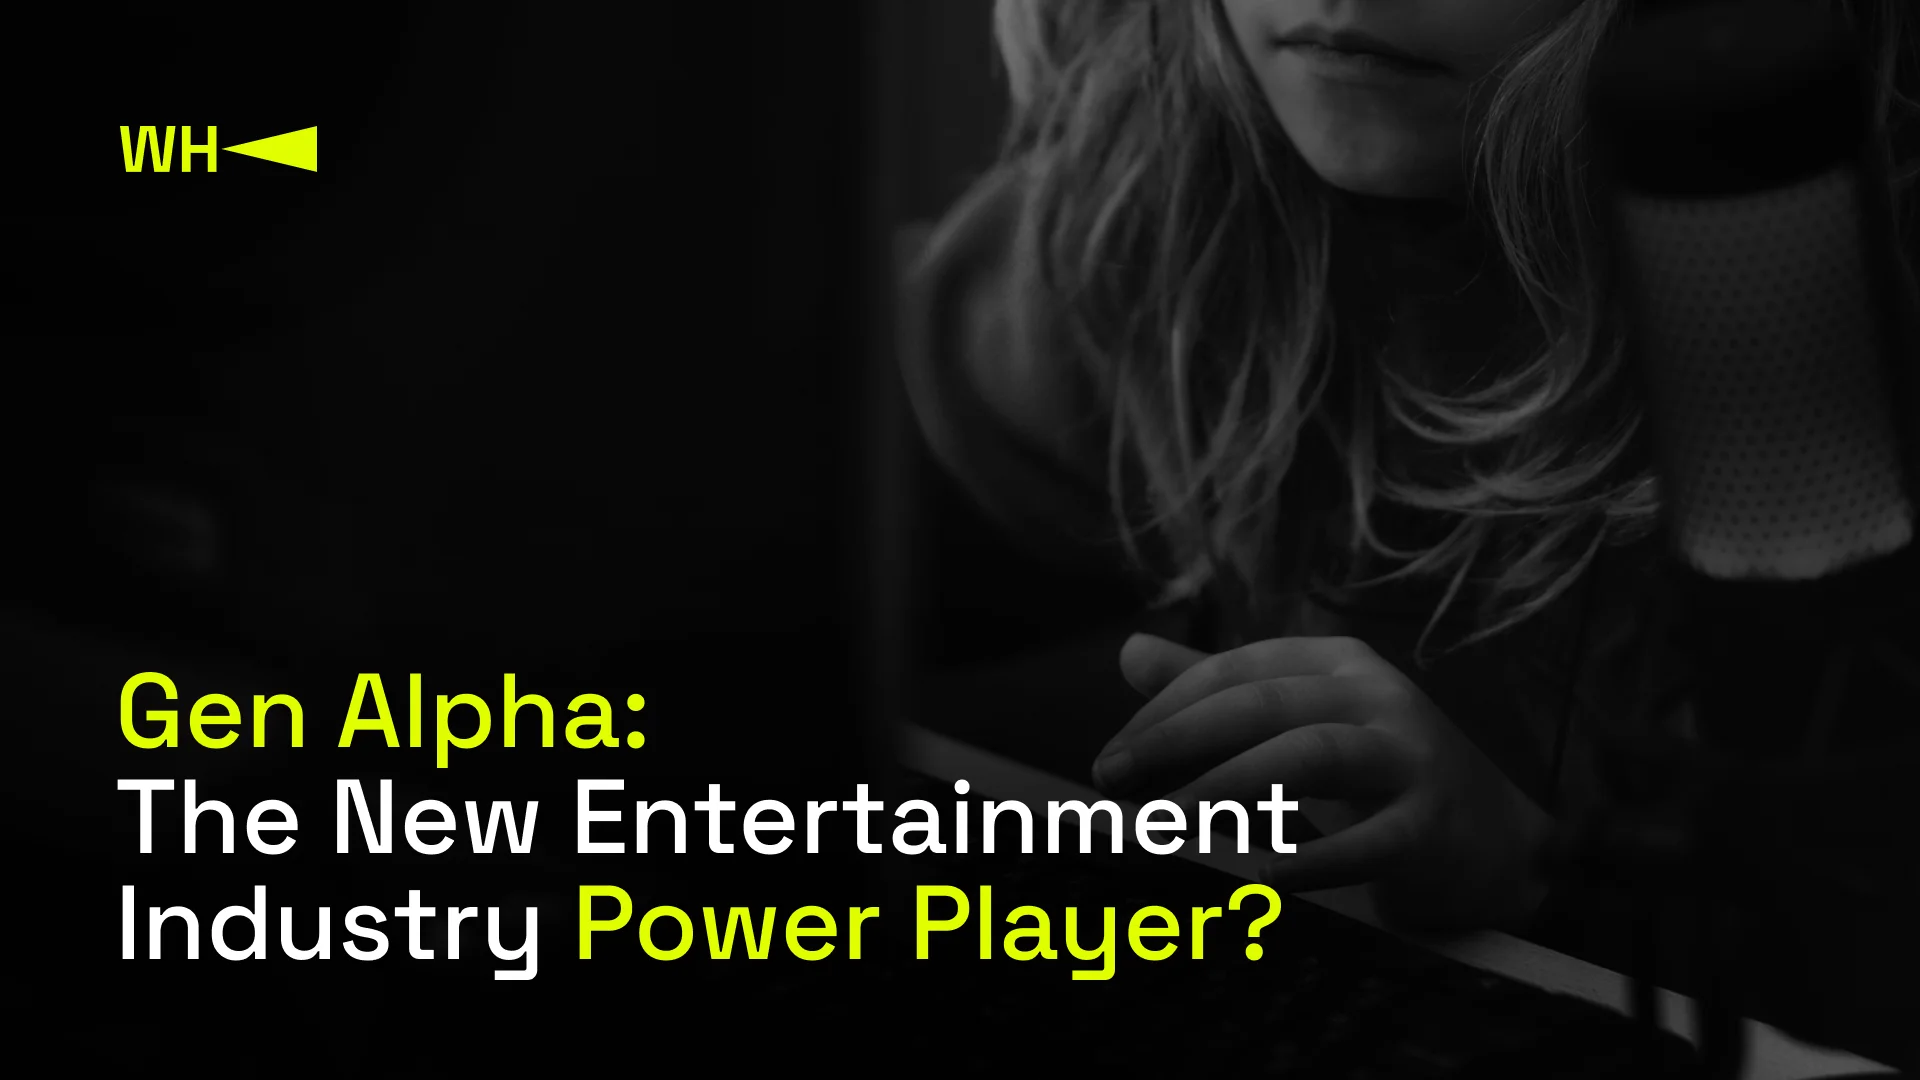 Gen Alpha: The New Entertainment Industry Power Player?